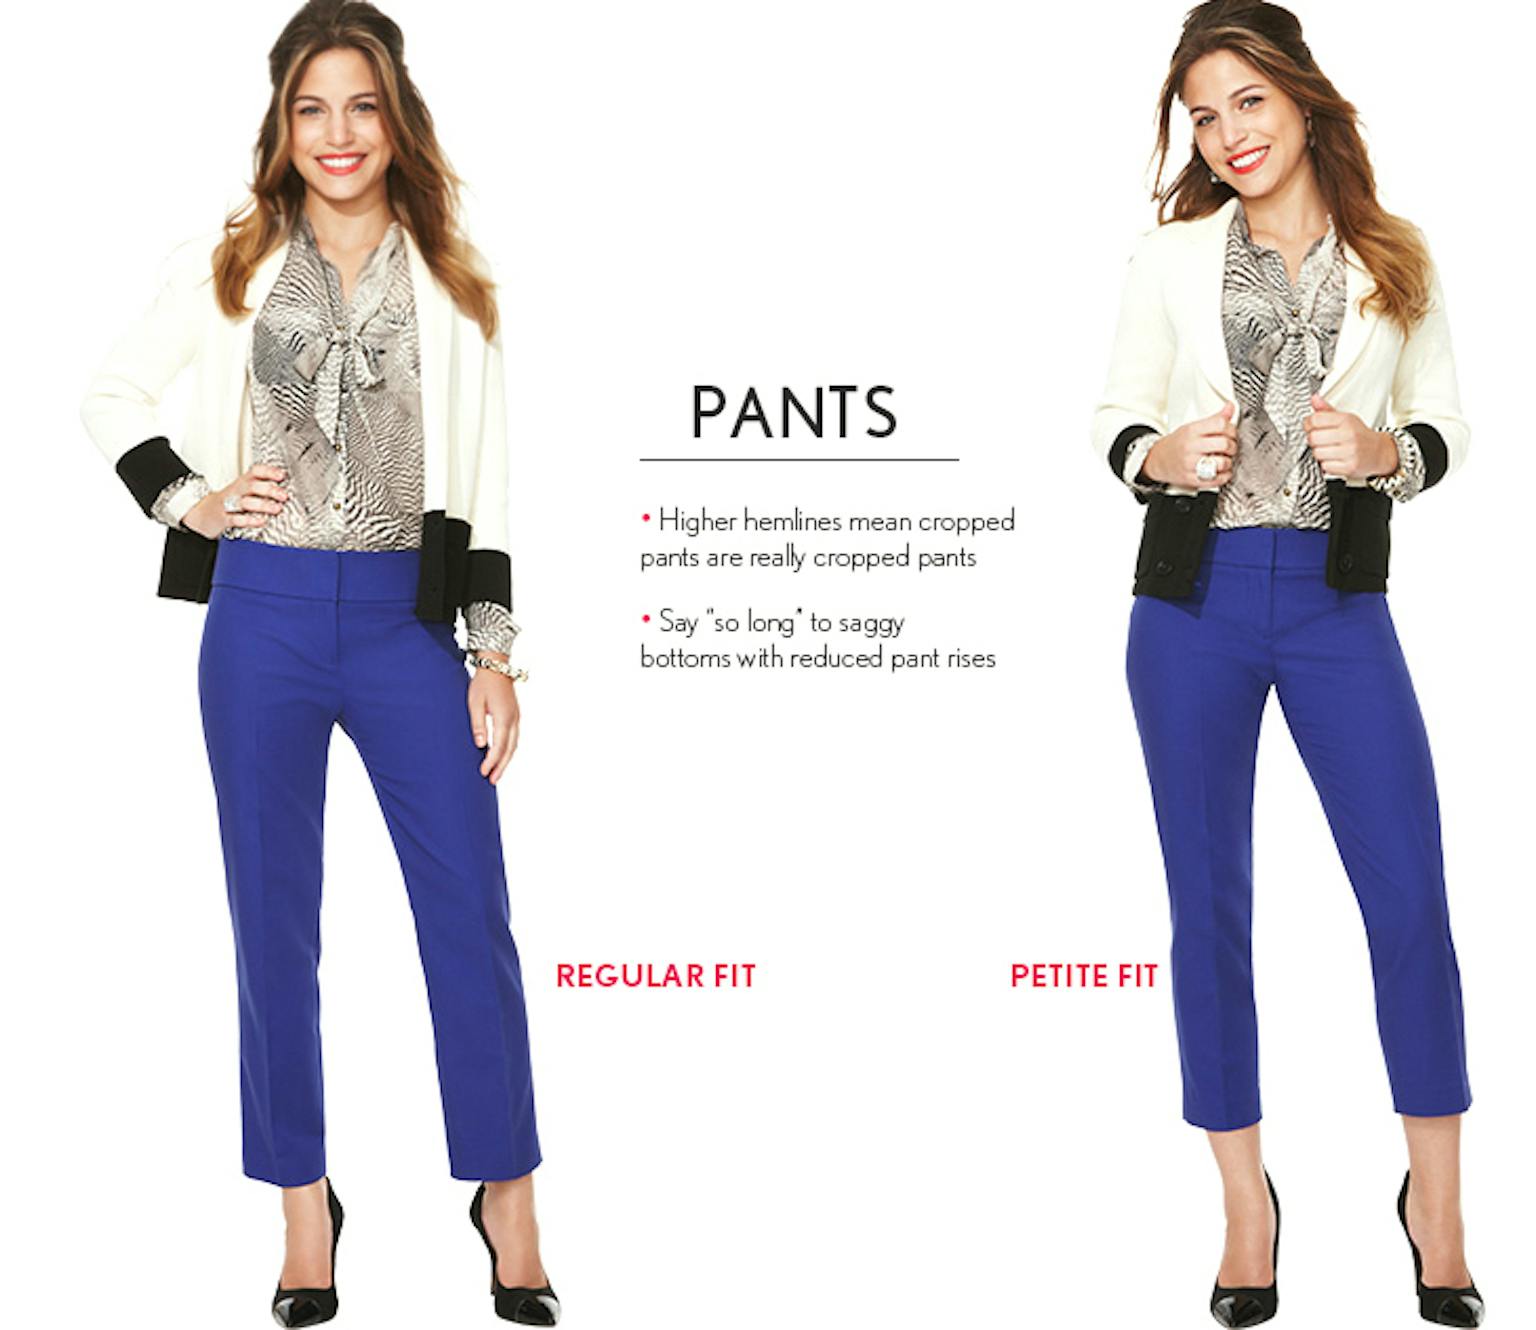 The Complete Pants Guide for Petite Women - Petite Dressing  Short women  fashion, Fashion for petite women, Petite women